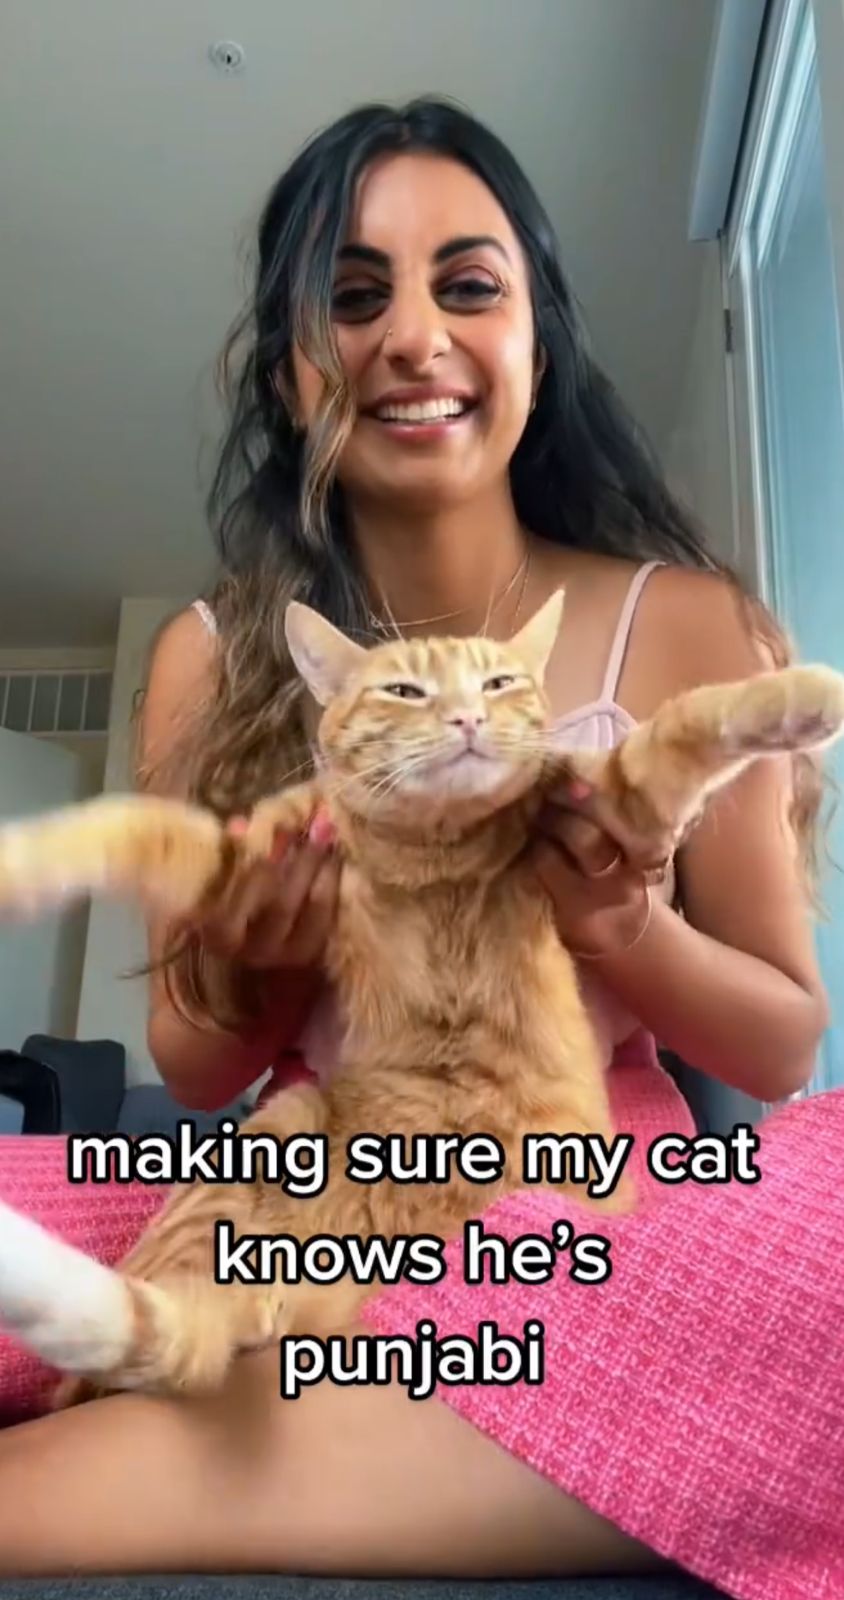 This cat is pure Punjabi, proves it with graceful Bhangra moves on 'Heer majajan aayi' in viral video